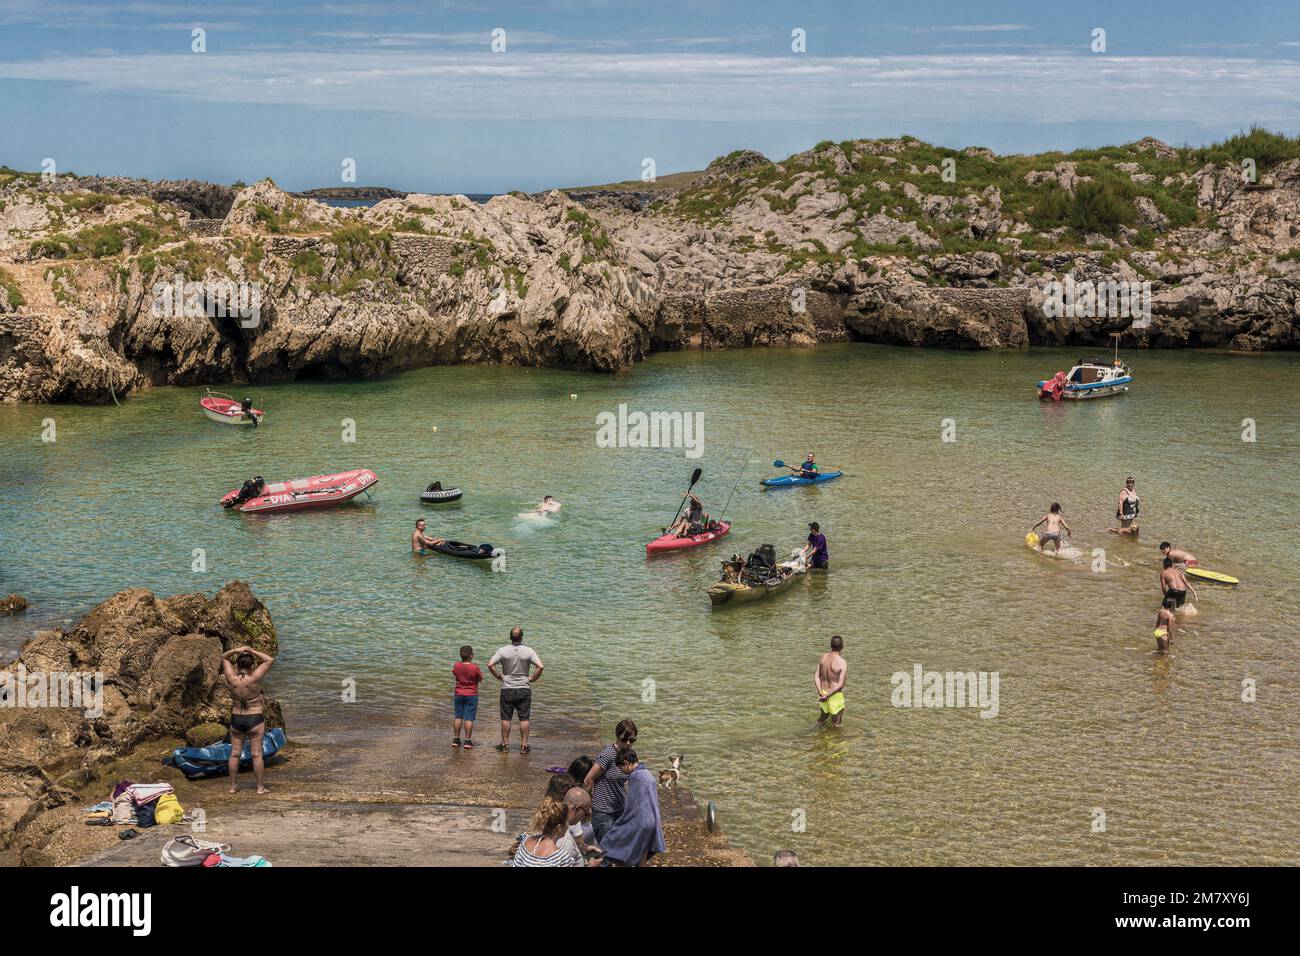 men, women, youth, boys and girls bathing, fishing in a canoe, paddle surfing and sitting sunbathing on a beach closed by rocks and stones in Spain. Stock Photo